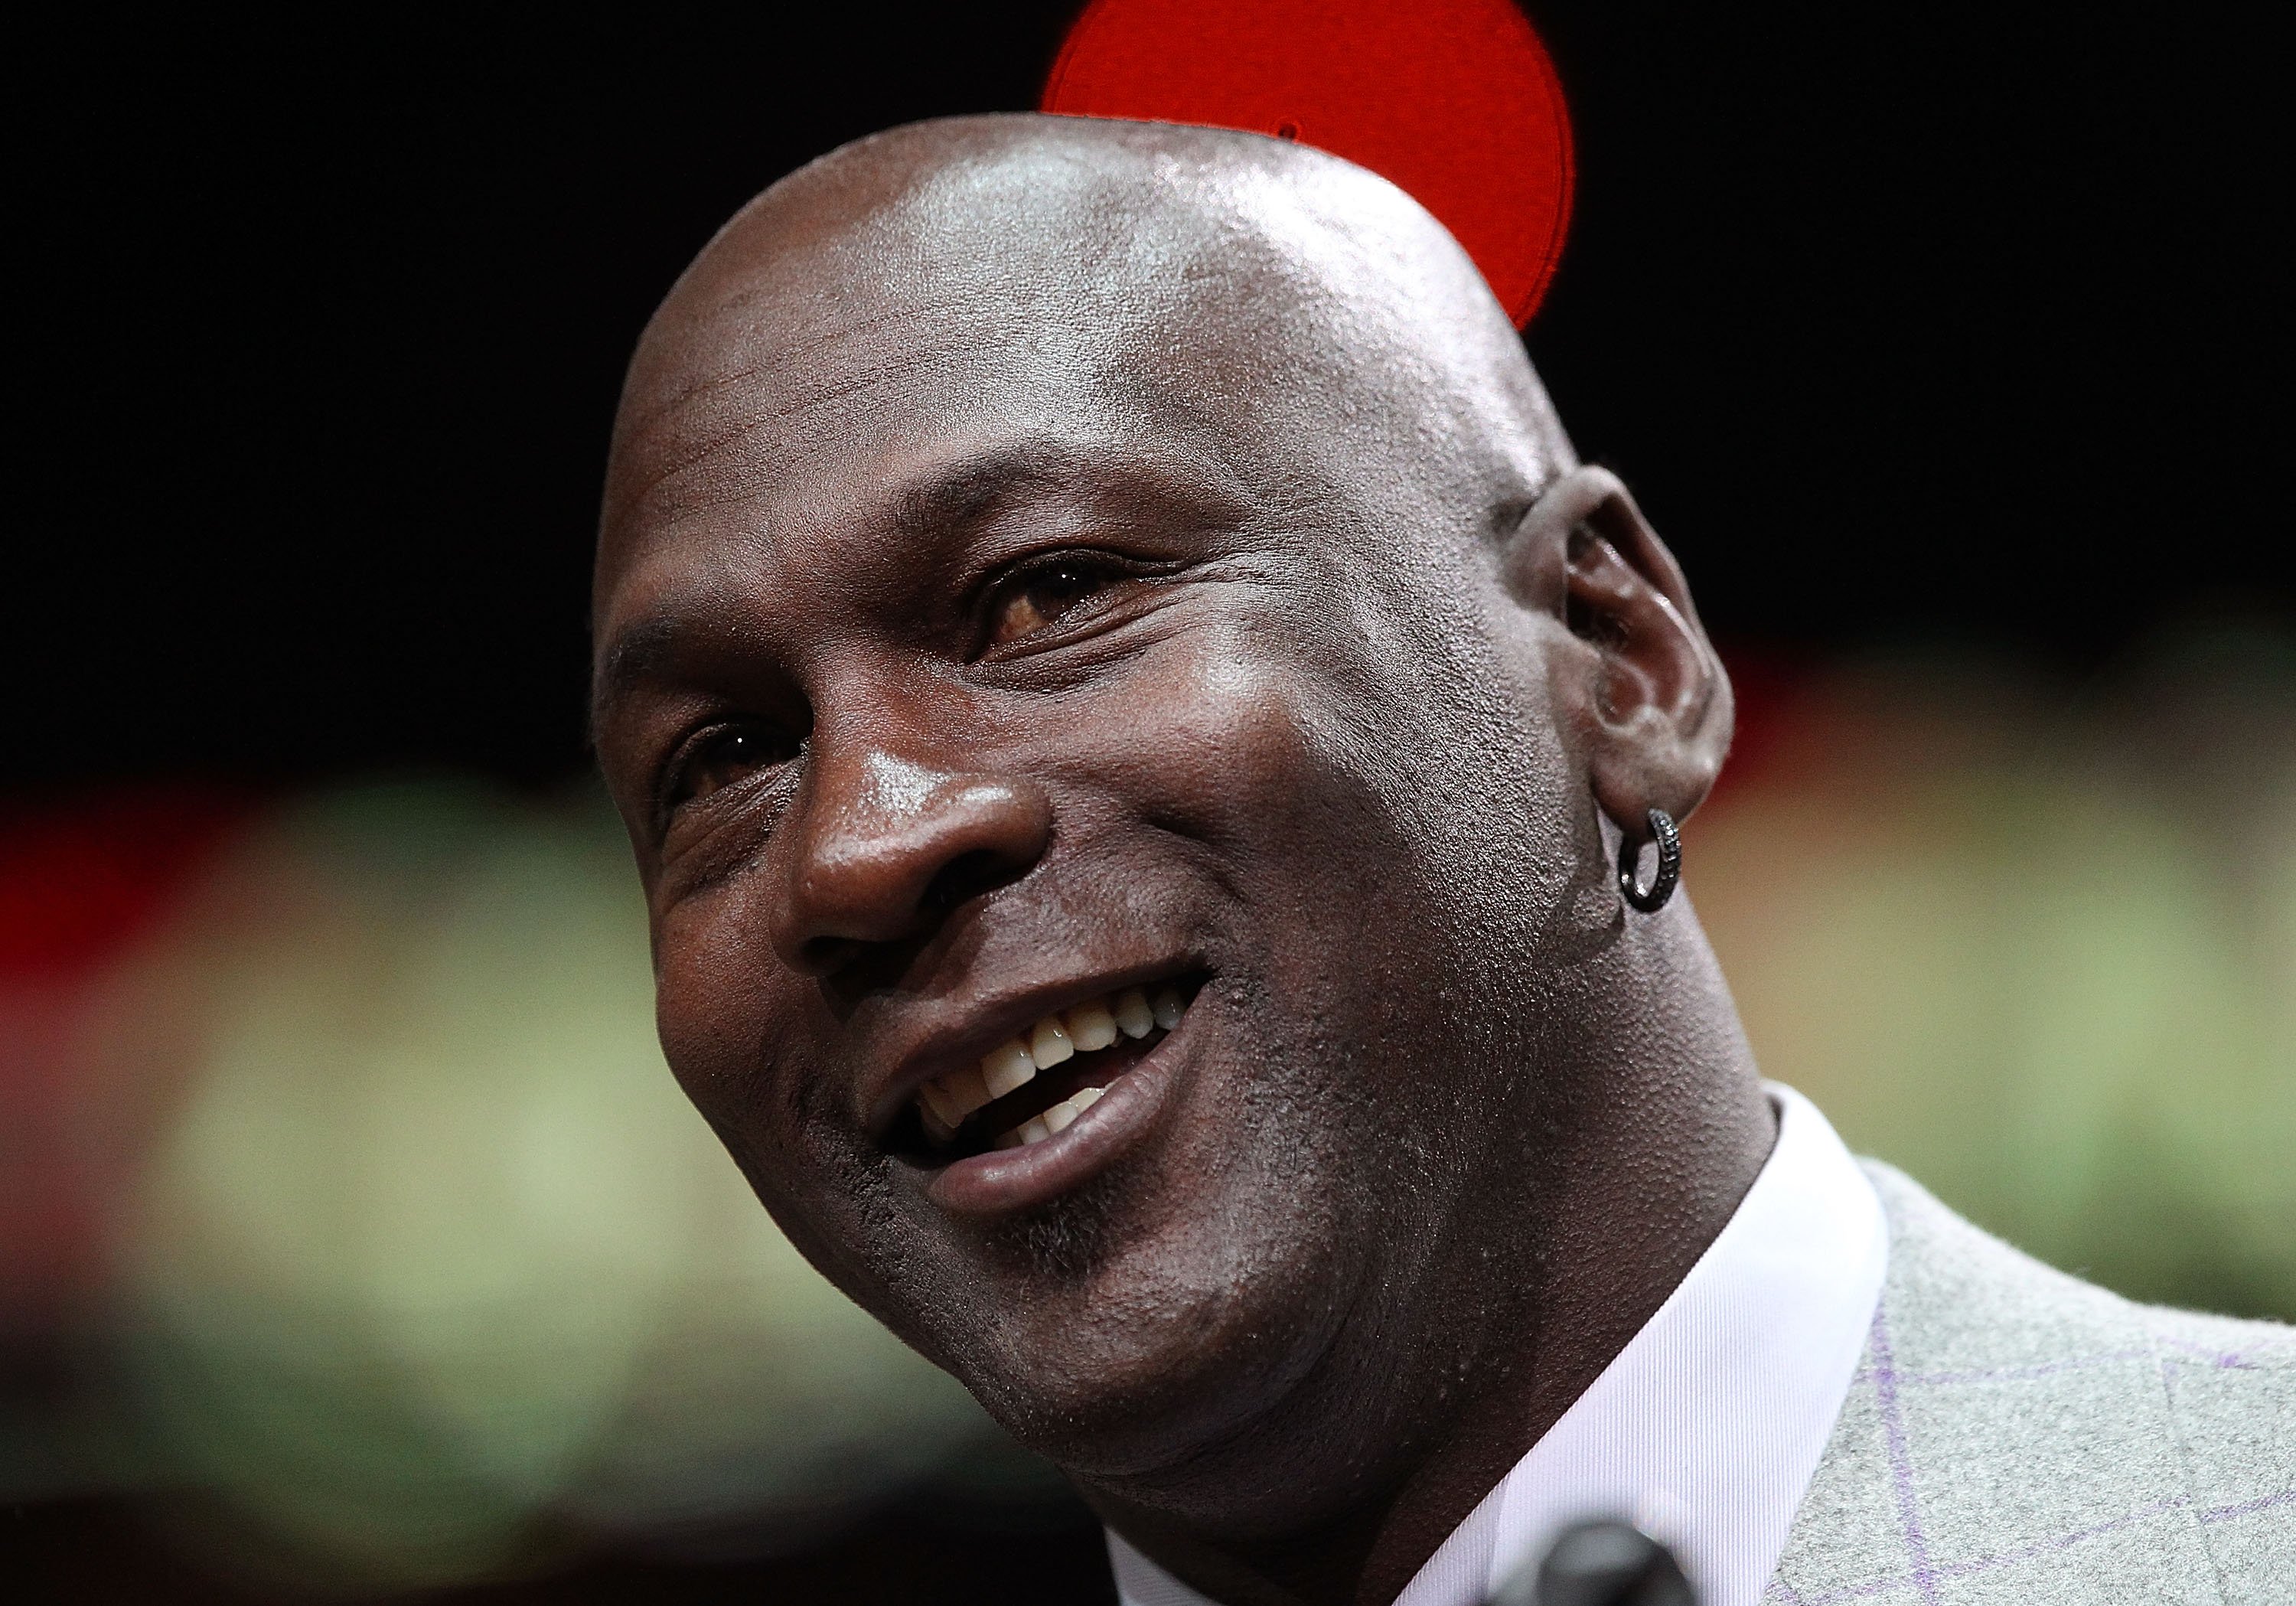 Michael Jordan during a 20th anniversary ceremony of the Bulls 1st NBA Championship in 1991 on March 12, 2011 in Chicago, Illinois | Photo: Getty Images